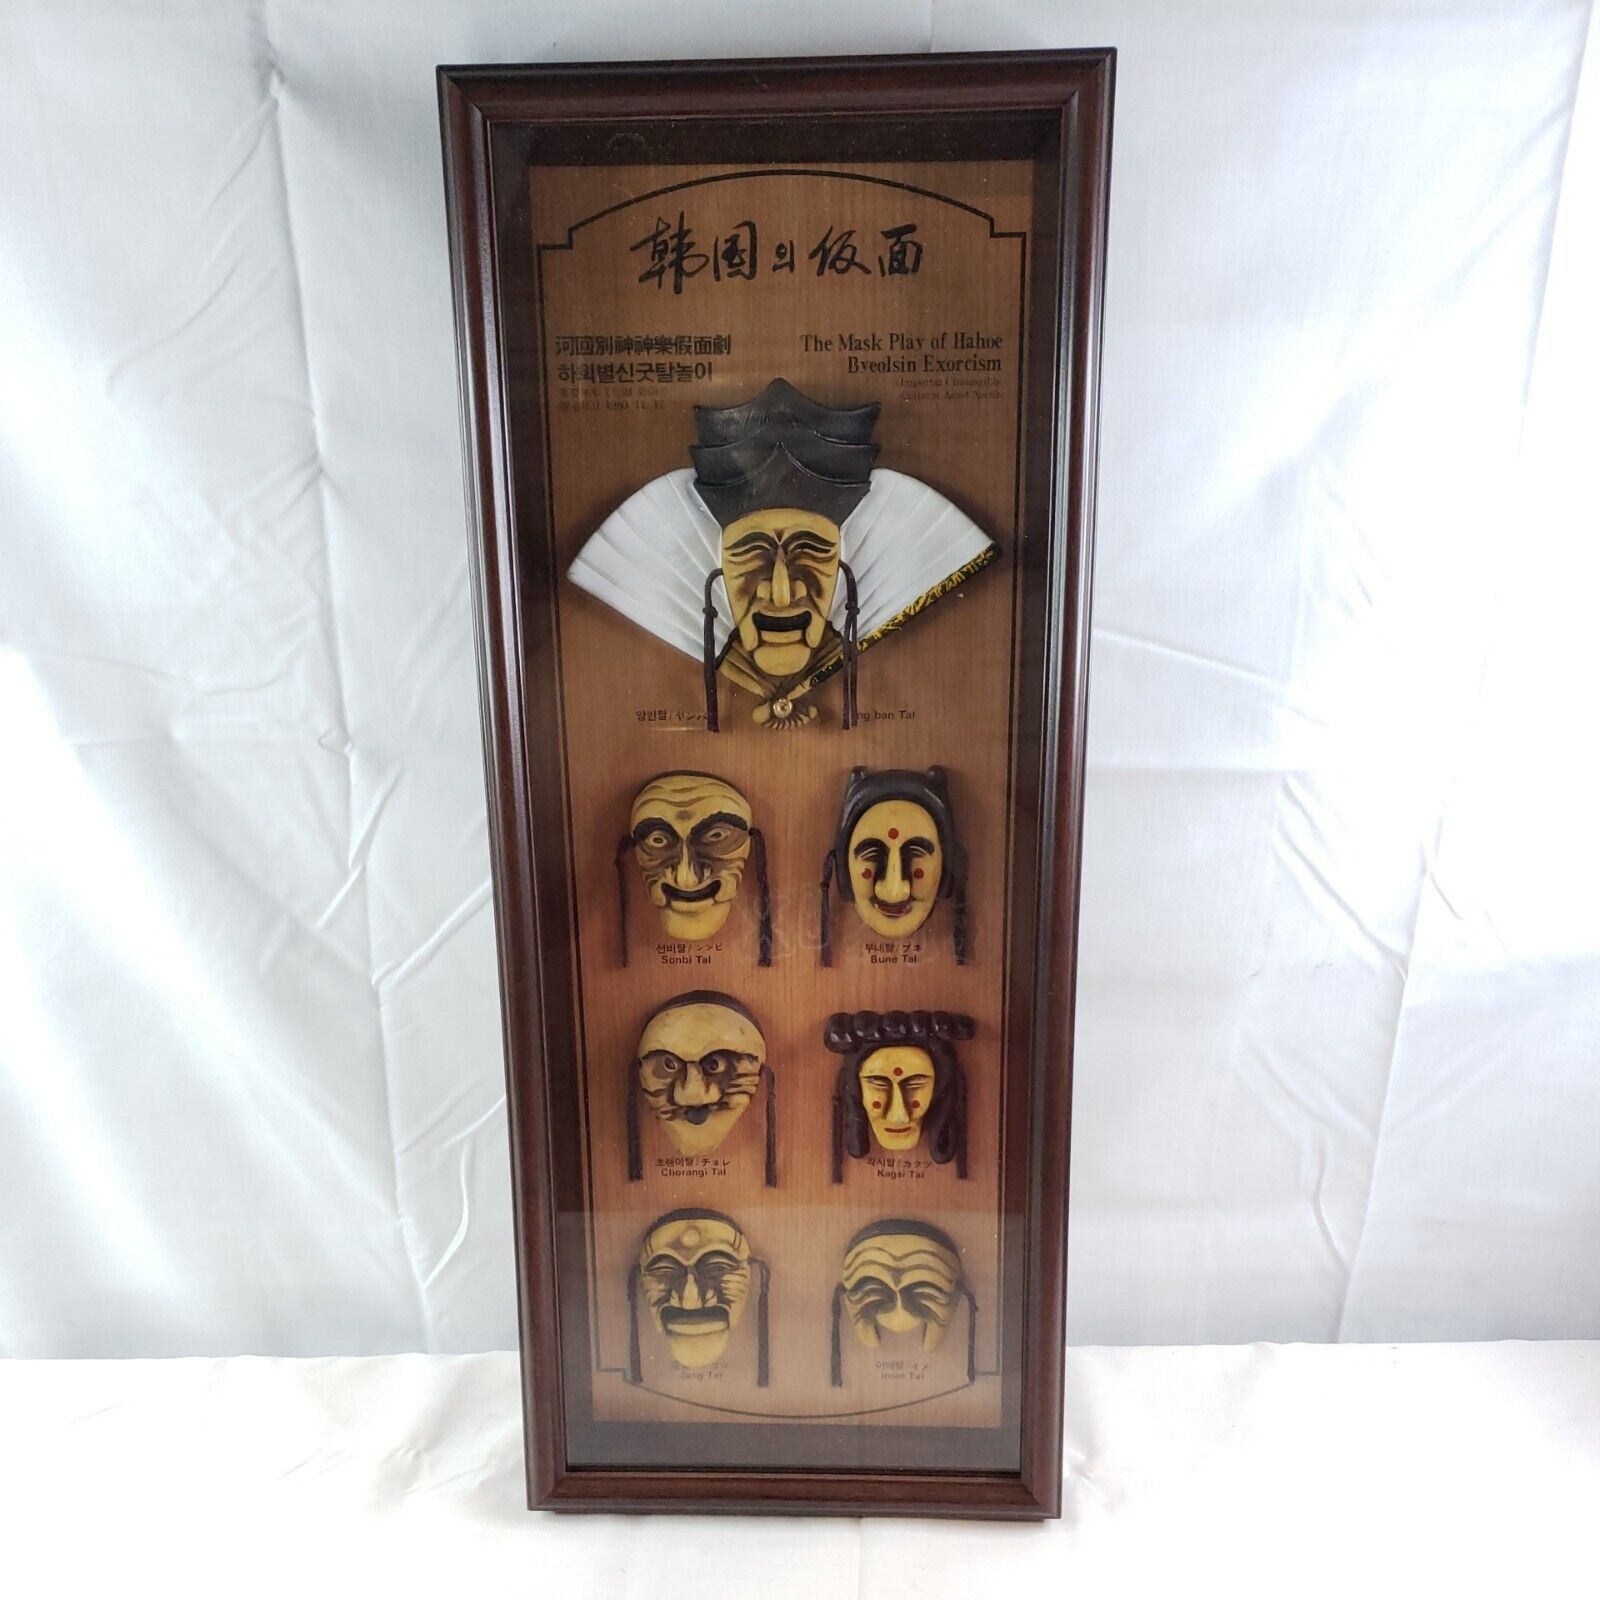 DAEJIN Korean Traditional Mask Frame The Mask Play of Hahoe Byeolsin Exorcism